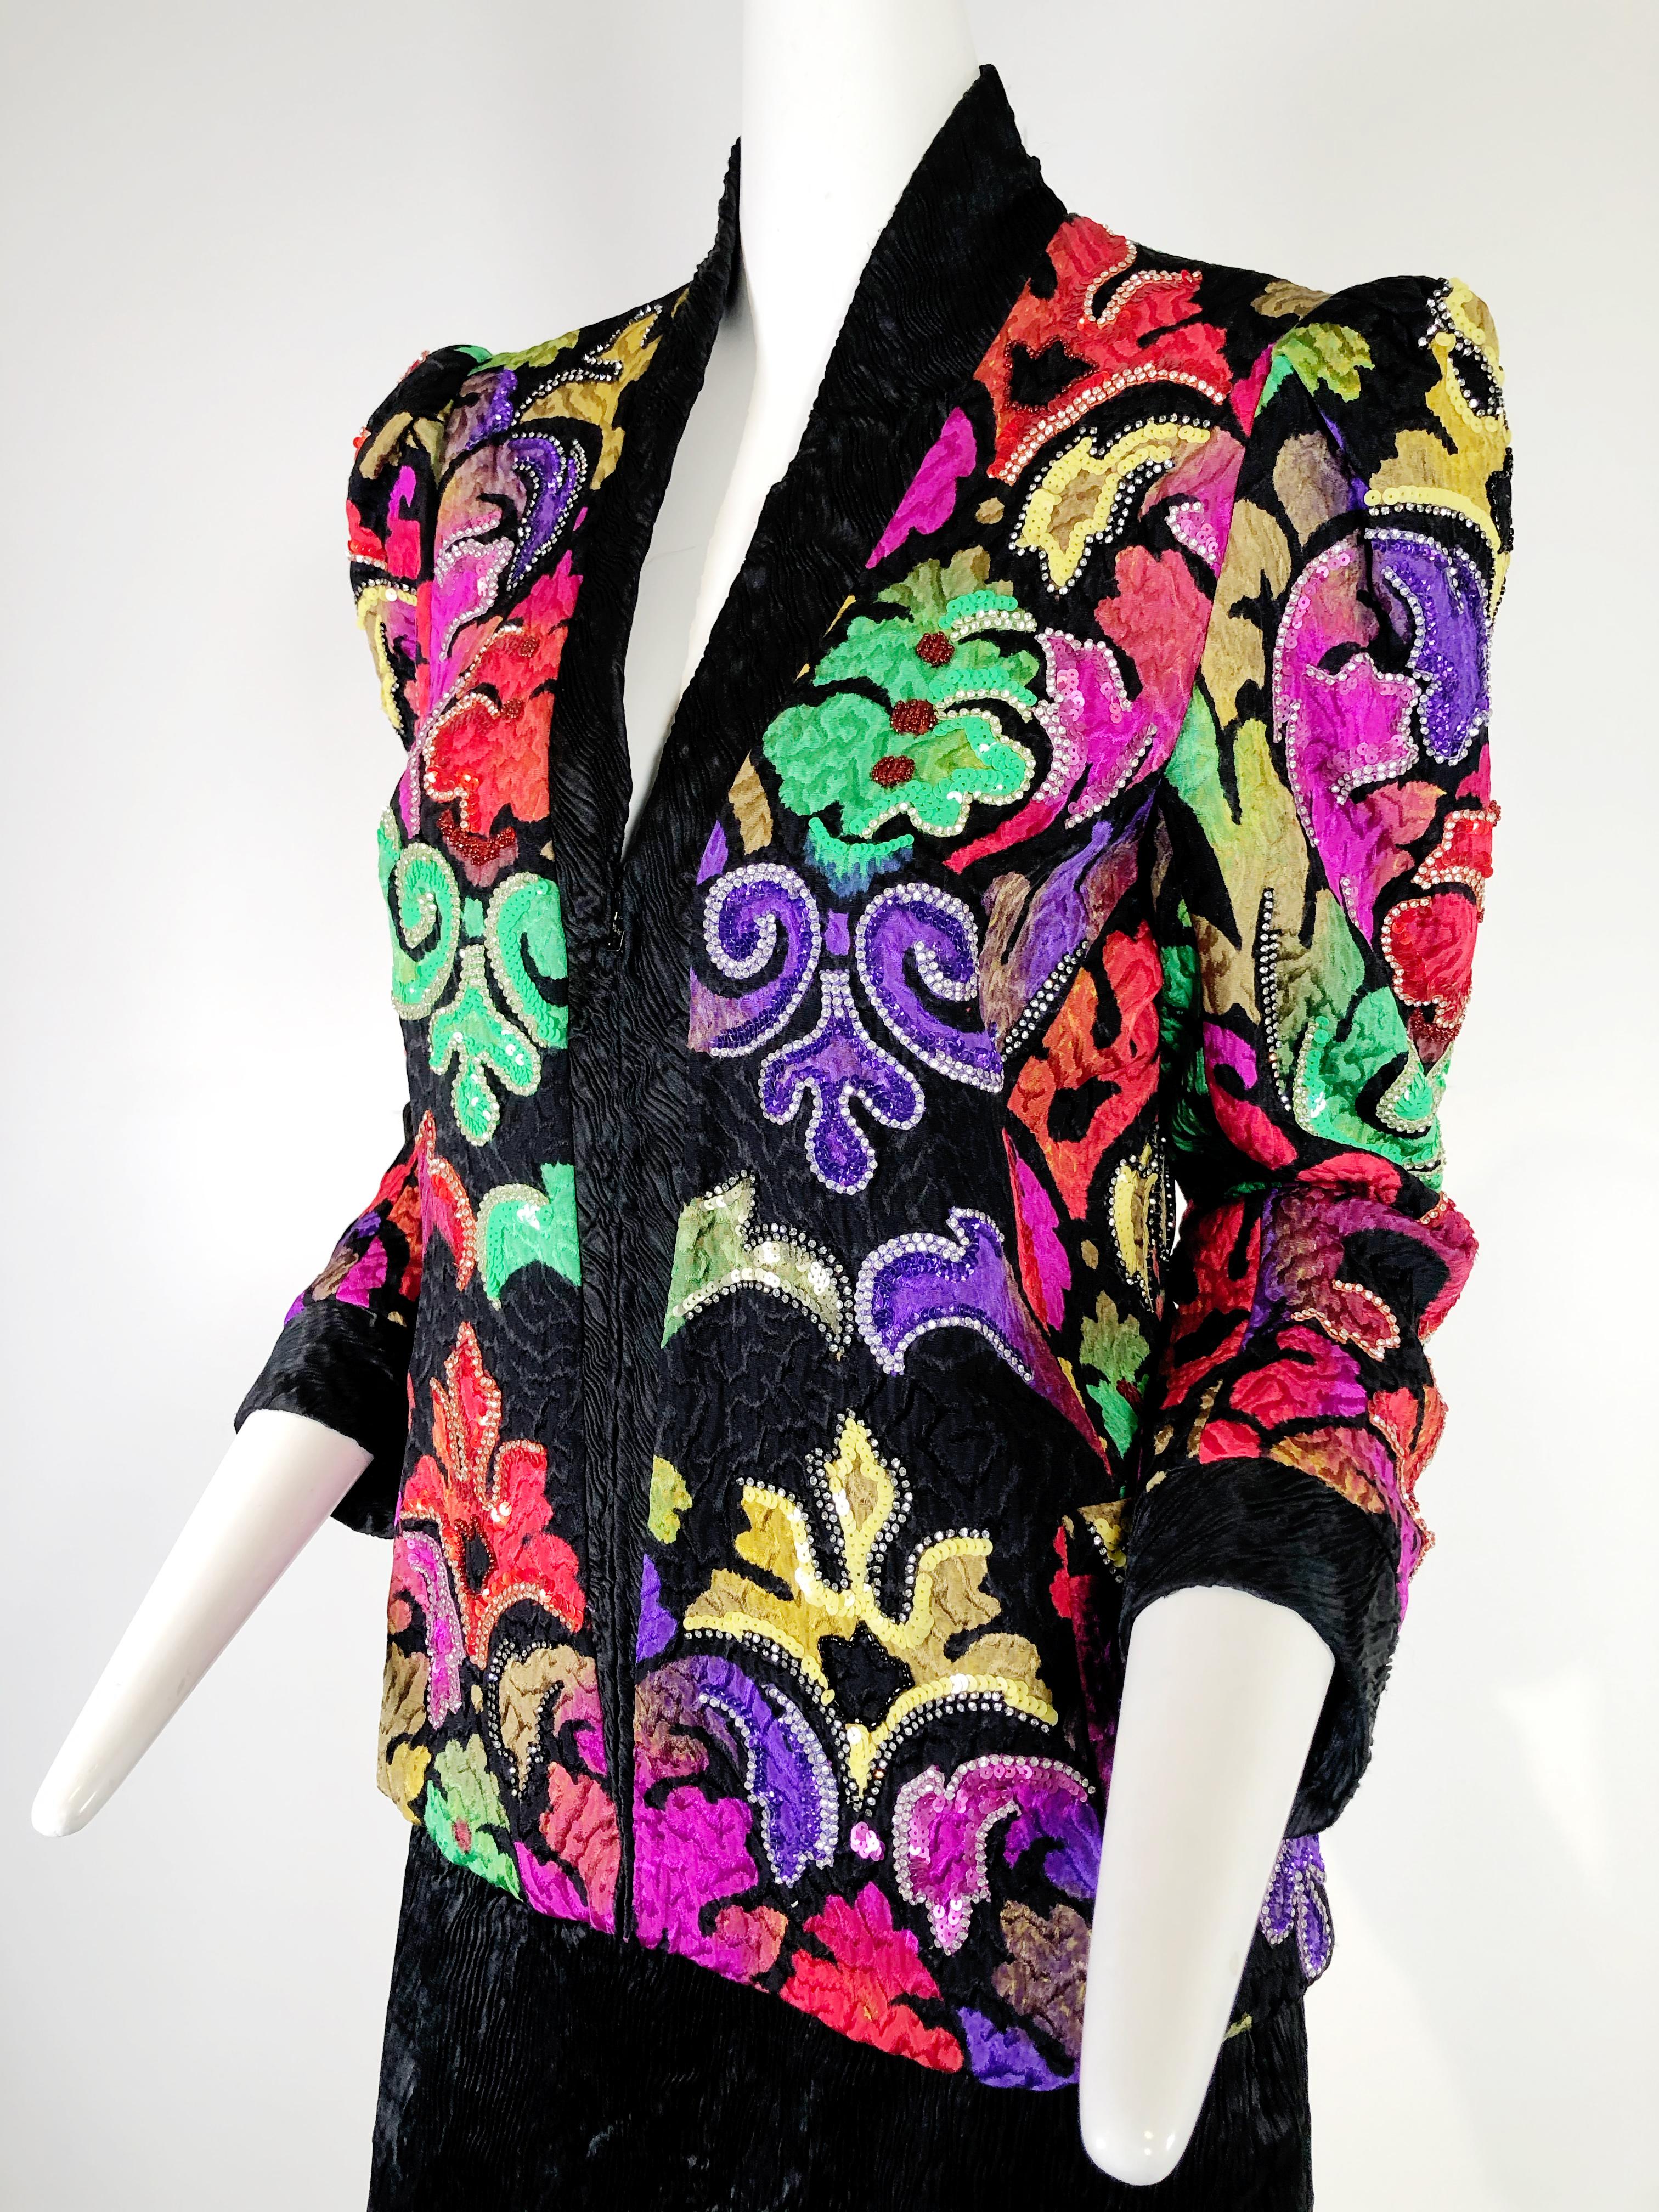 1980s Amen Wardy multi-color silk matelasse evening jacket in a rinceau pattern embellished with sequins and rhinestone trim and styled with a great puffed shoulder silhouette. Fully lined. Zippered front. 